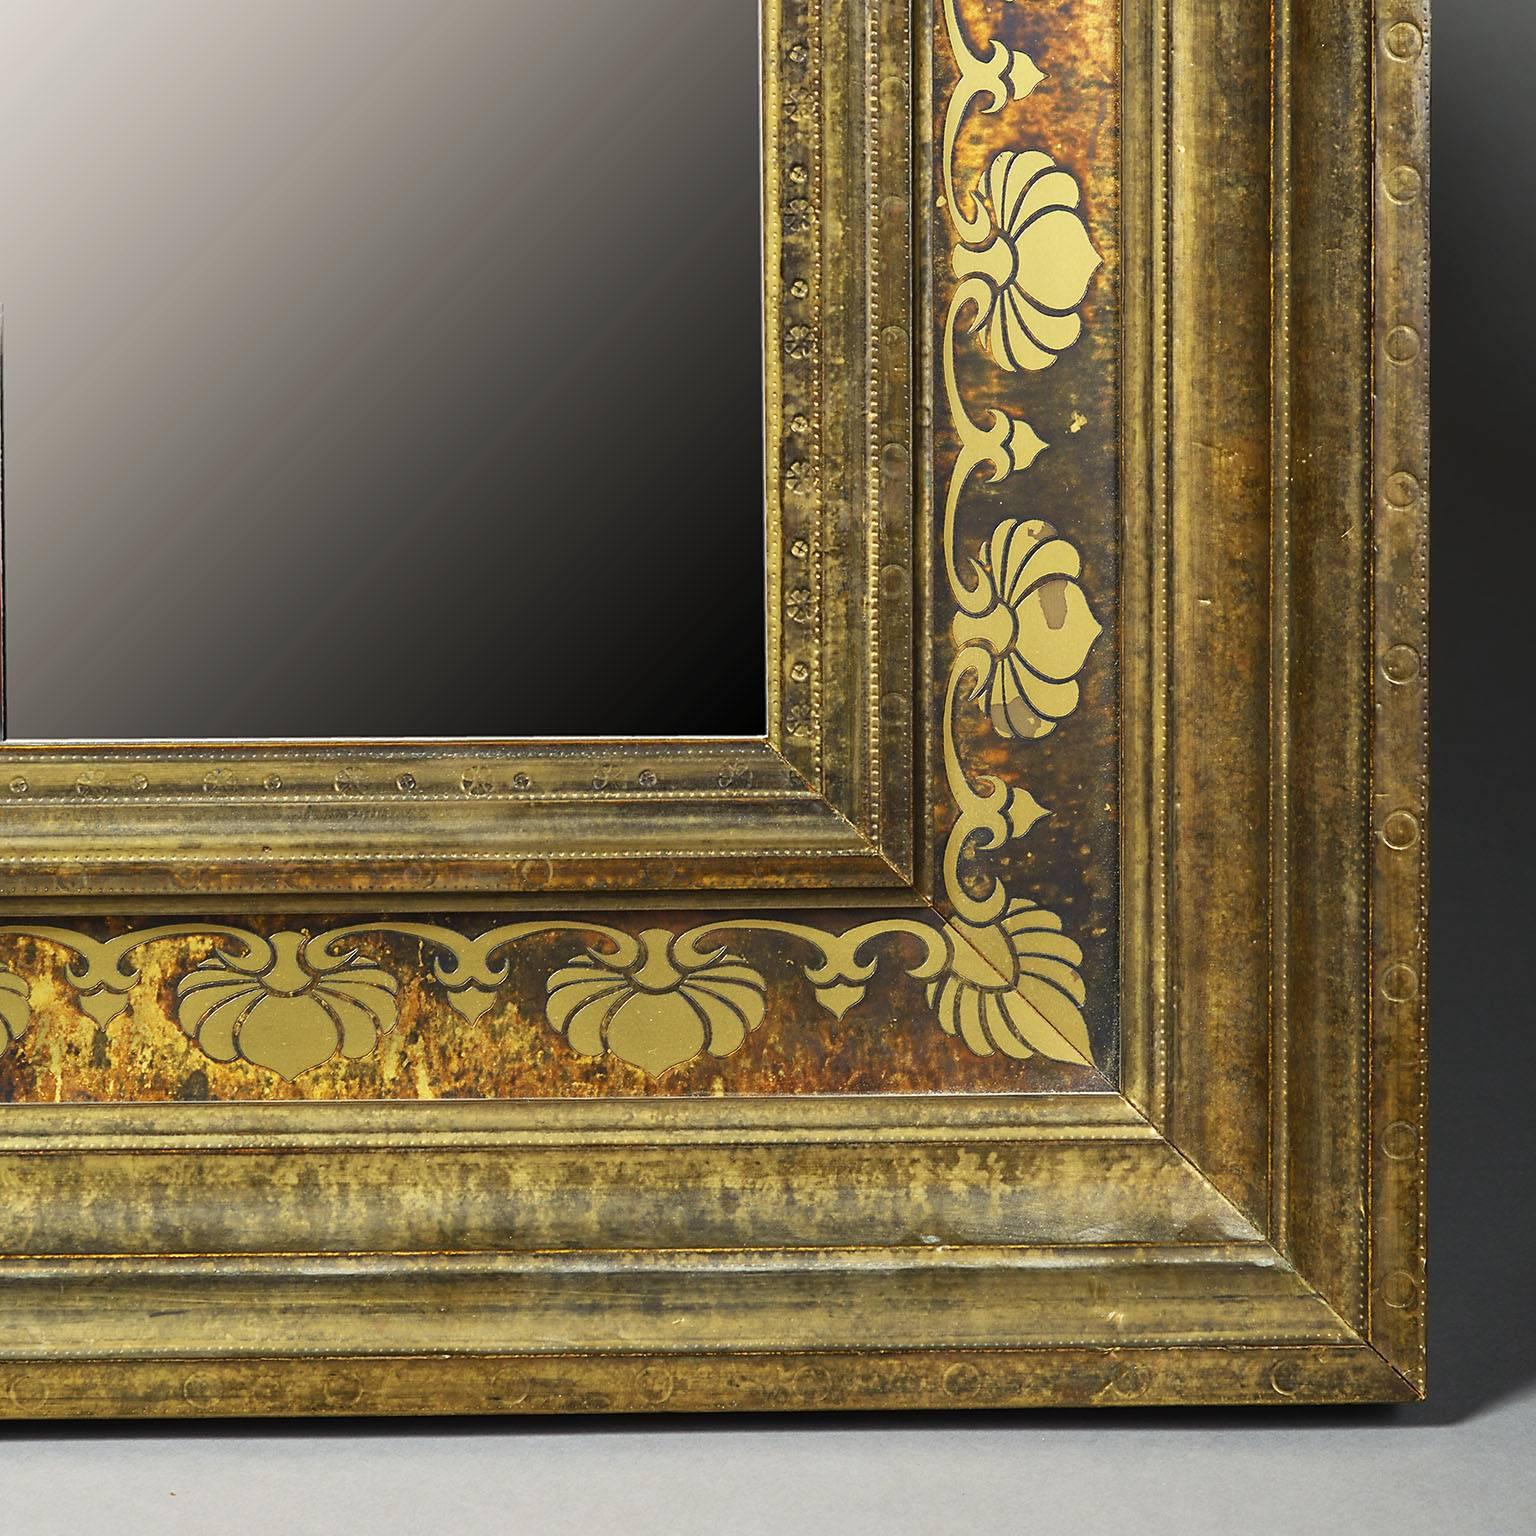 An early 20th century bronze Austrian Secessionist mirror with foliate decoration to the border.